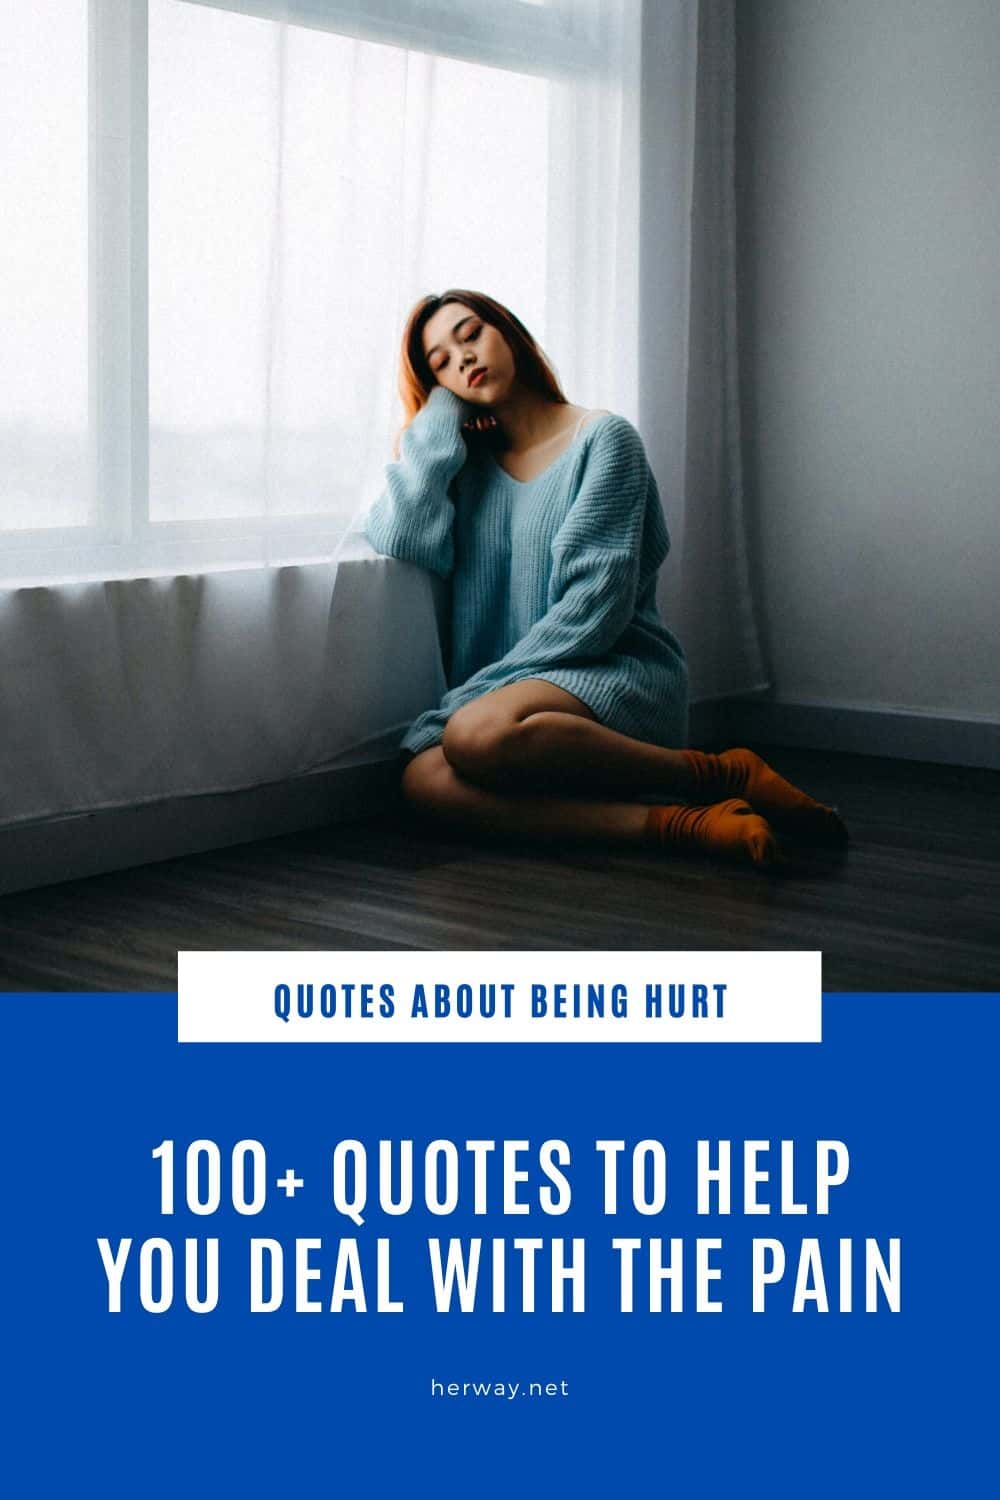 Quotes About Being Hurt 100+ Quotes To Help You Deal With The Pain